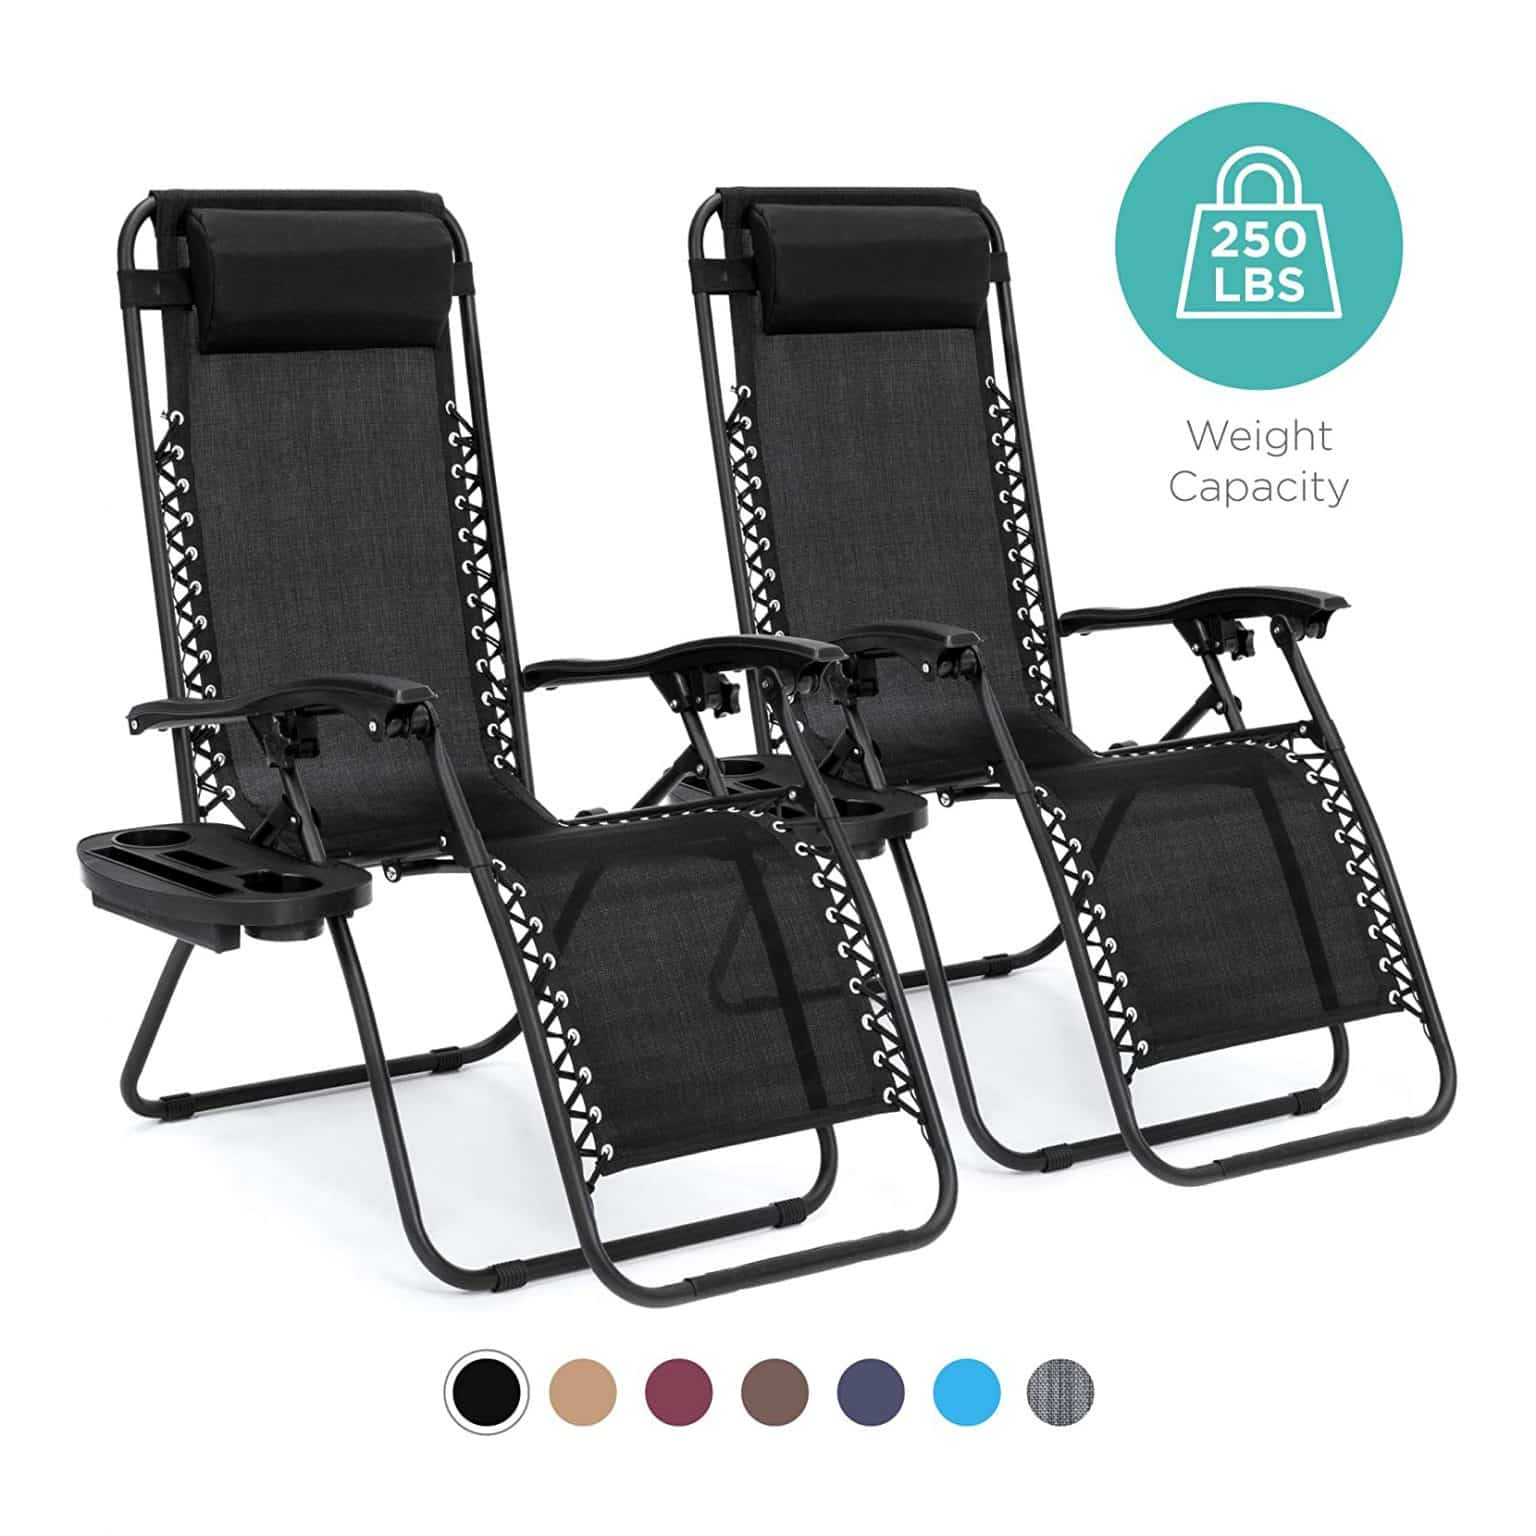 1. Best Choice Products Set Of 2 Chairs 1536x1536 